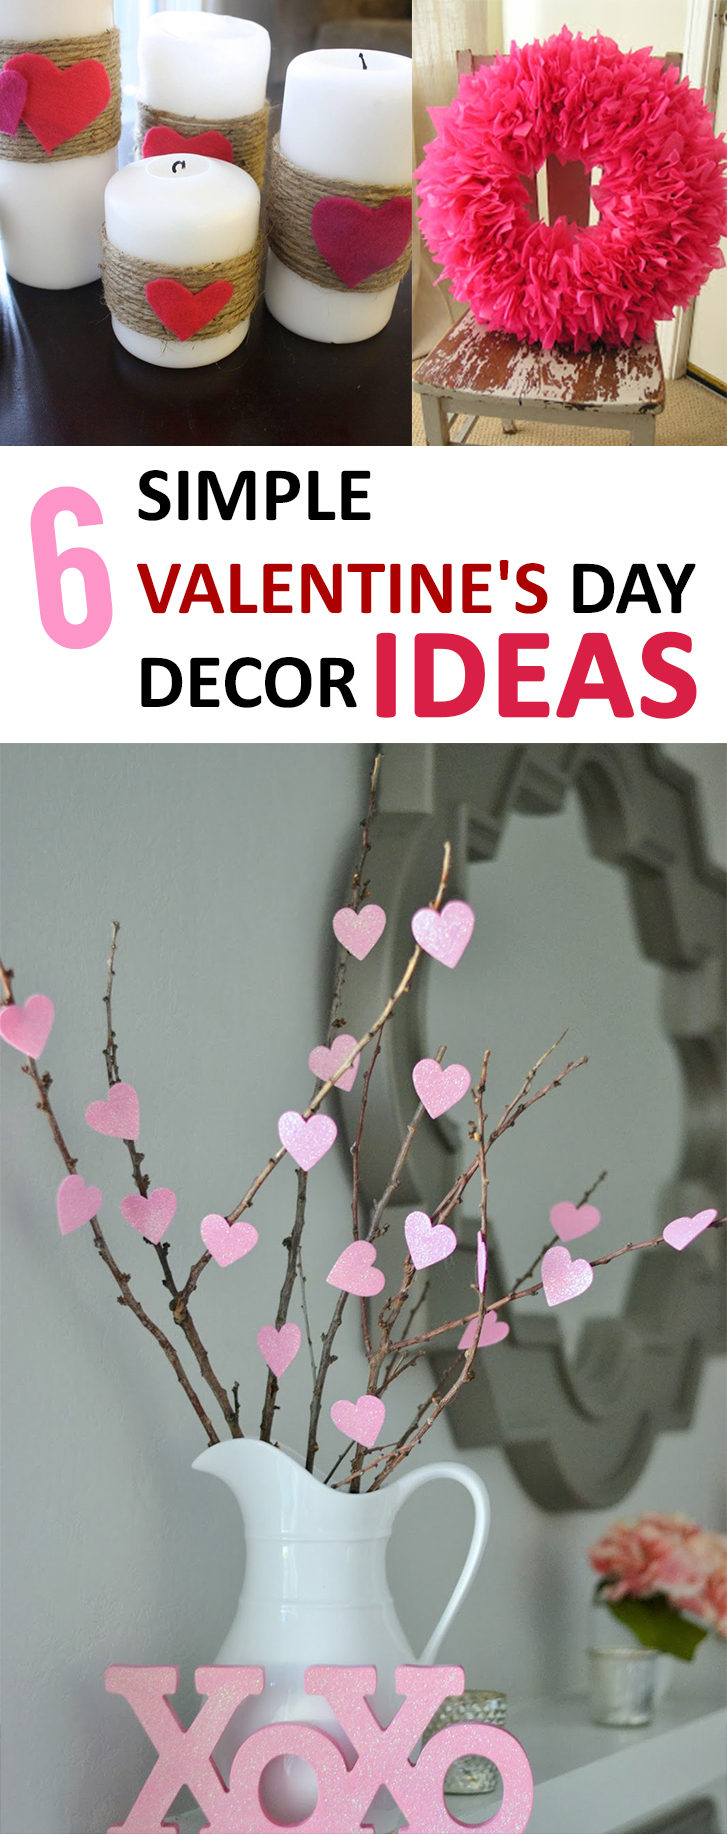 6 Simple Valentine’s Day Décor Ideas Sunlit Spaces DIY Home Decor, Holiday, and More